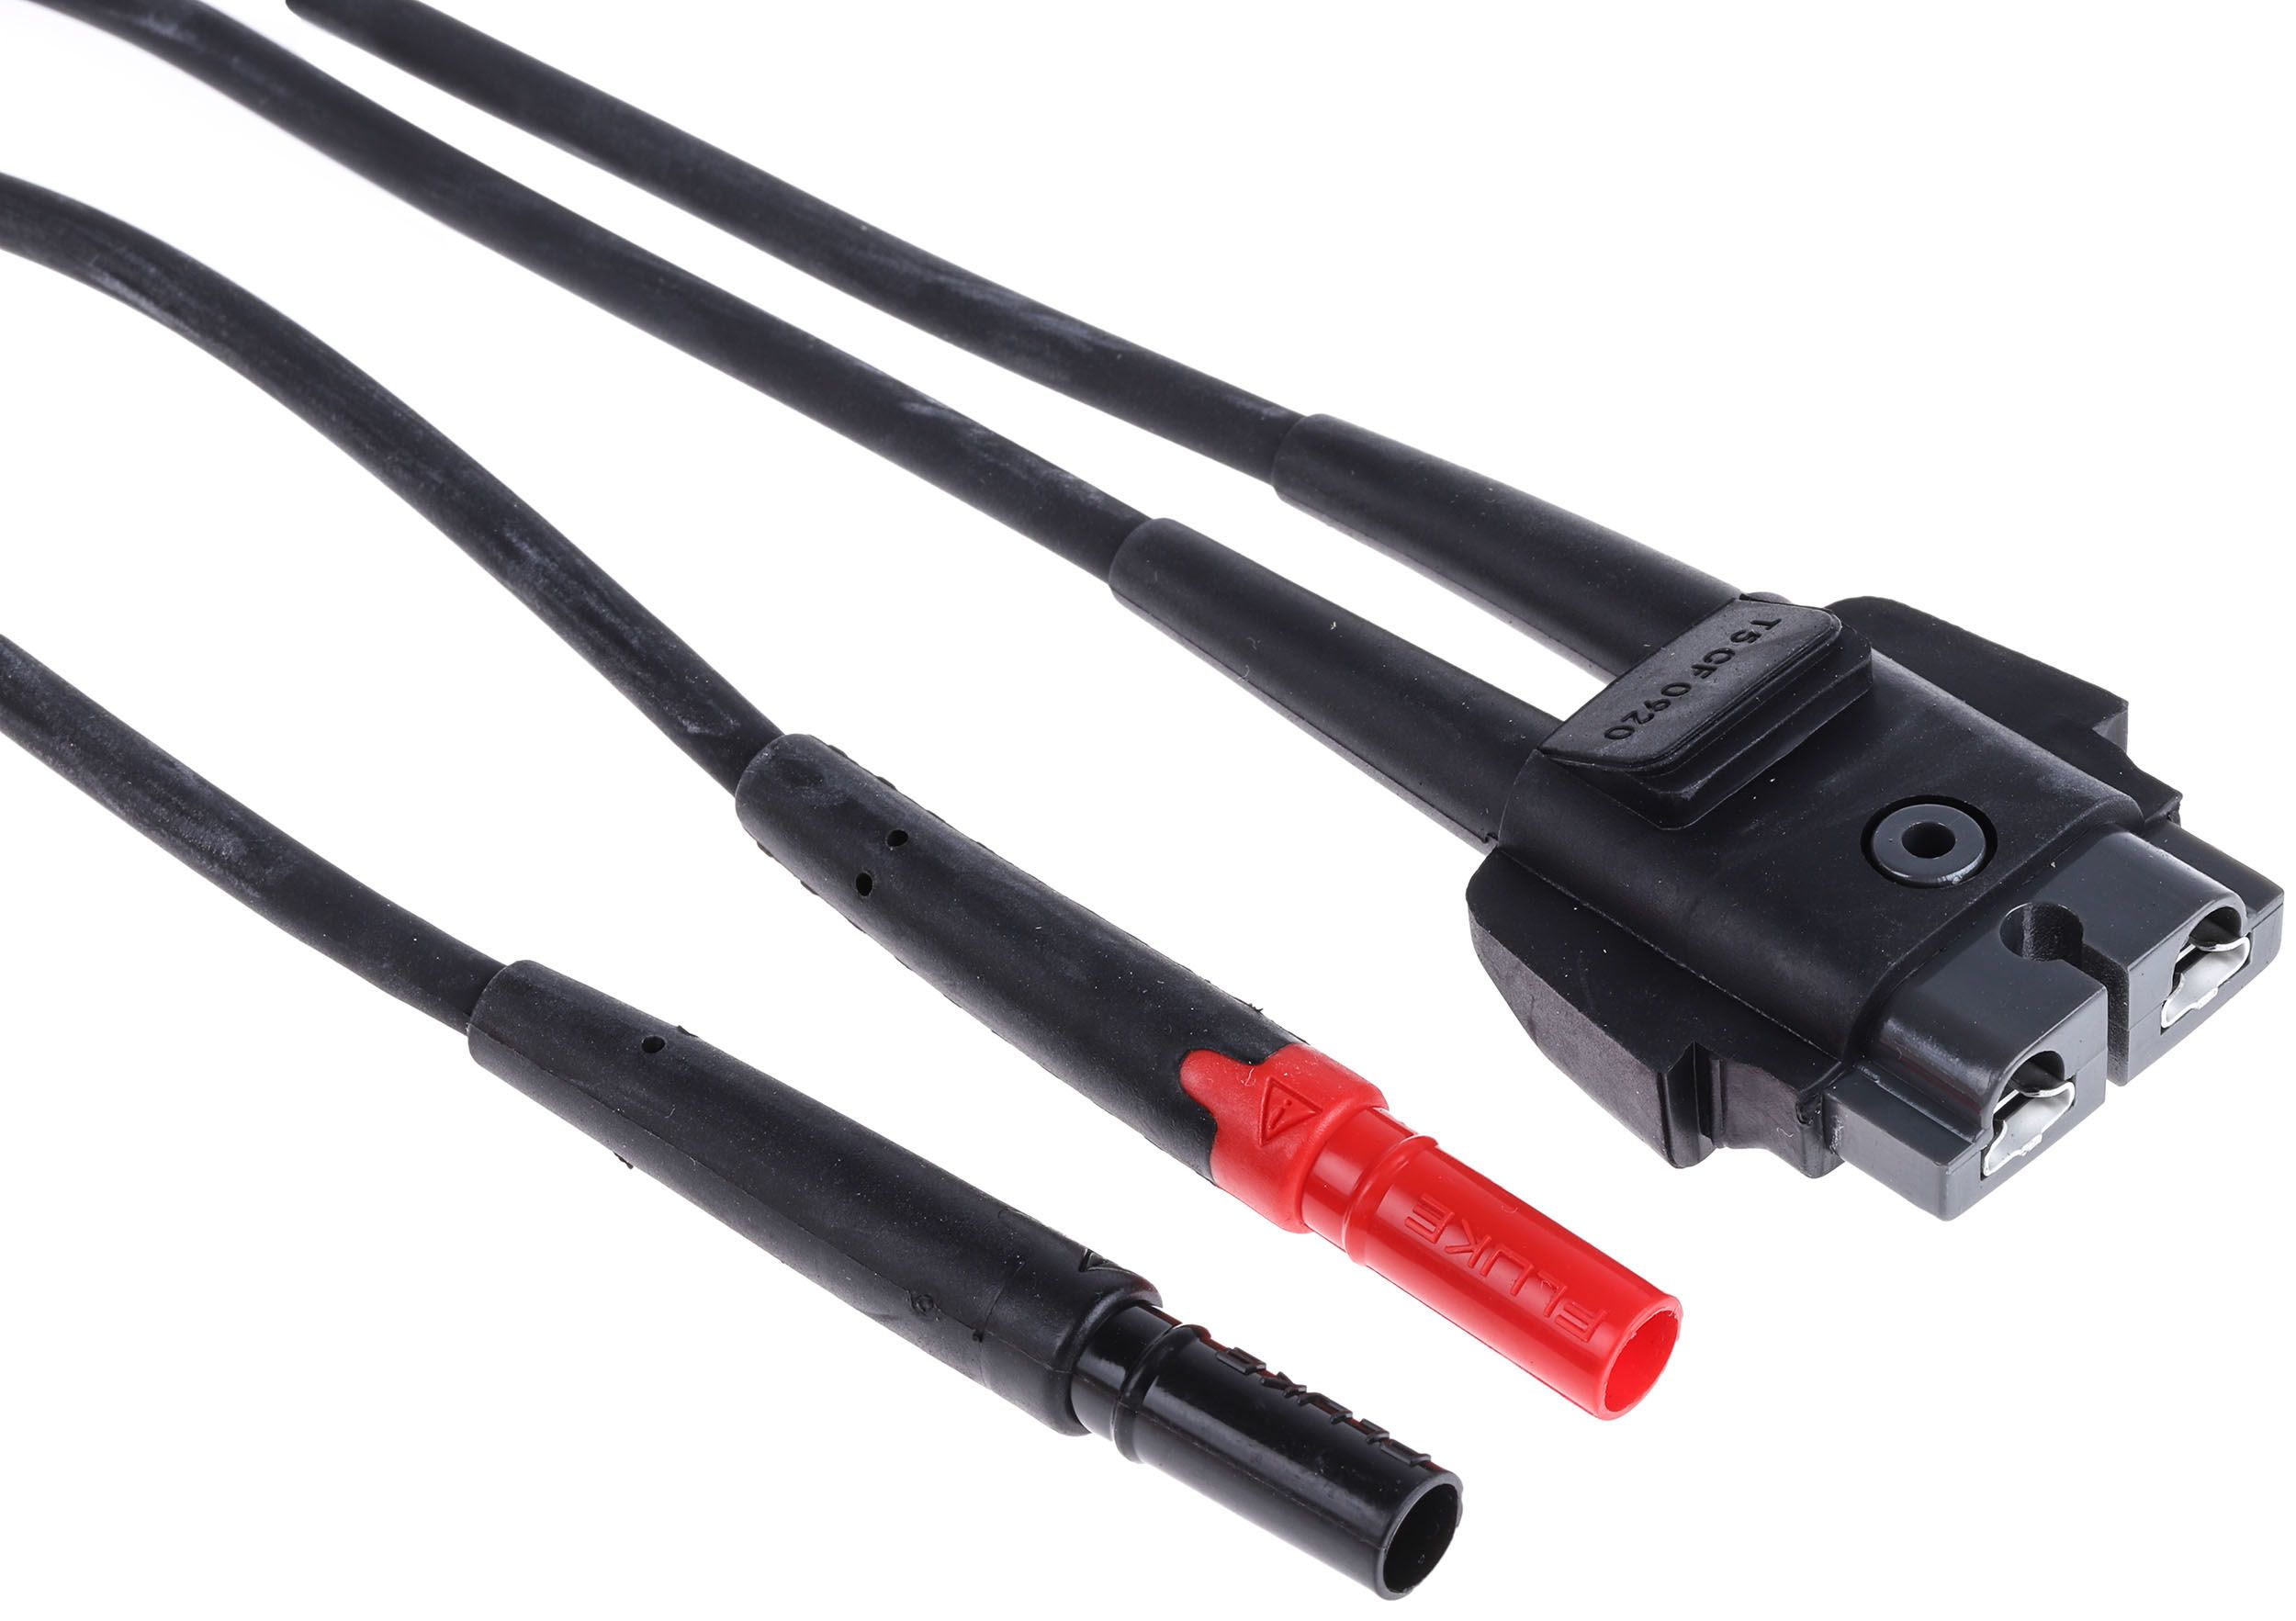 Fluke T5-RLS Test Leads, For Use With T5-1000, T5-600